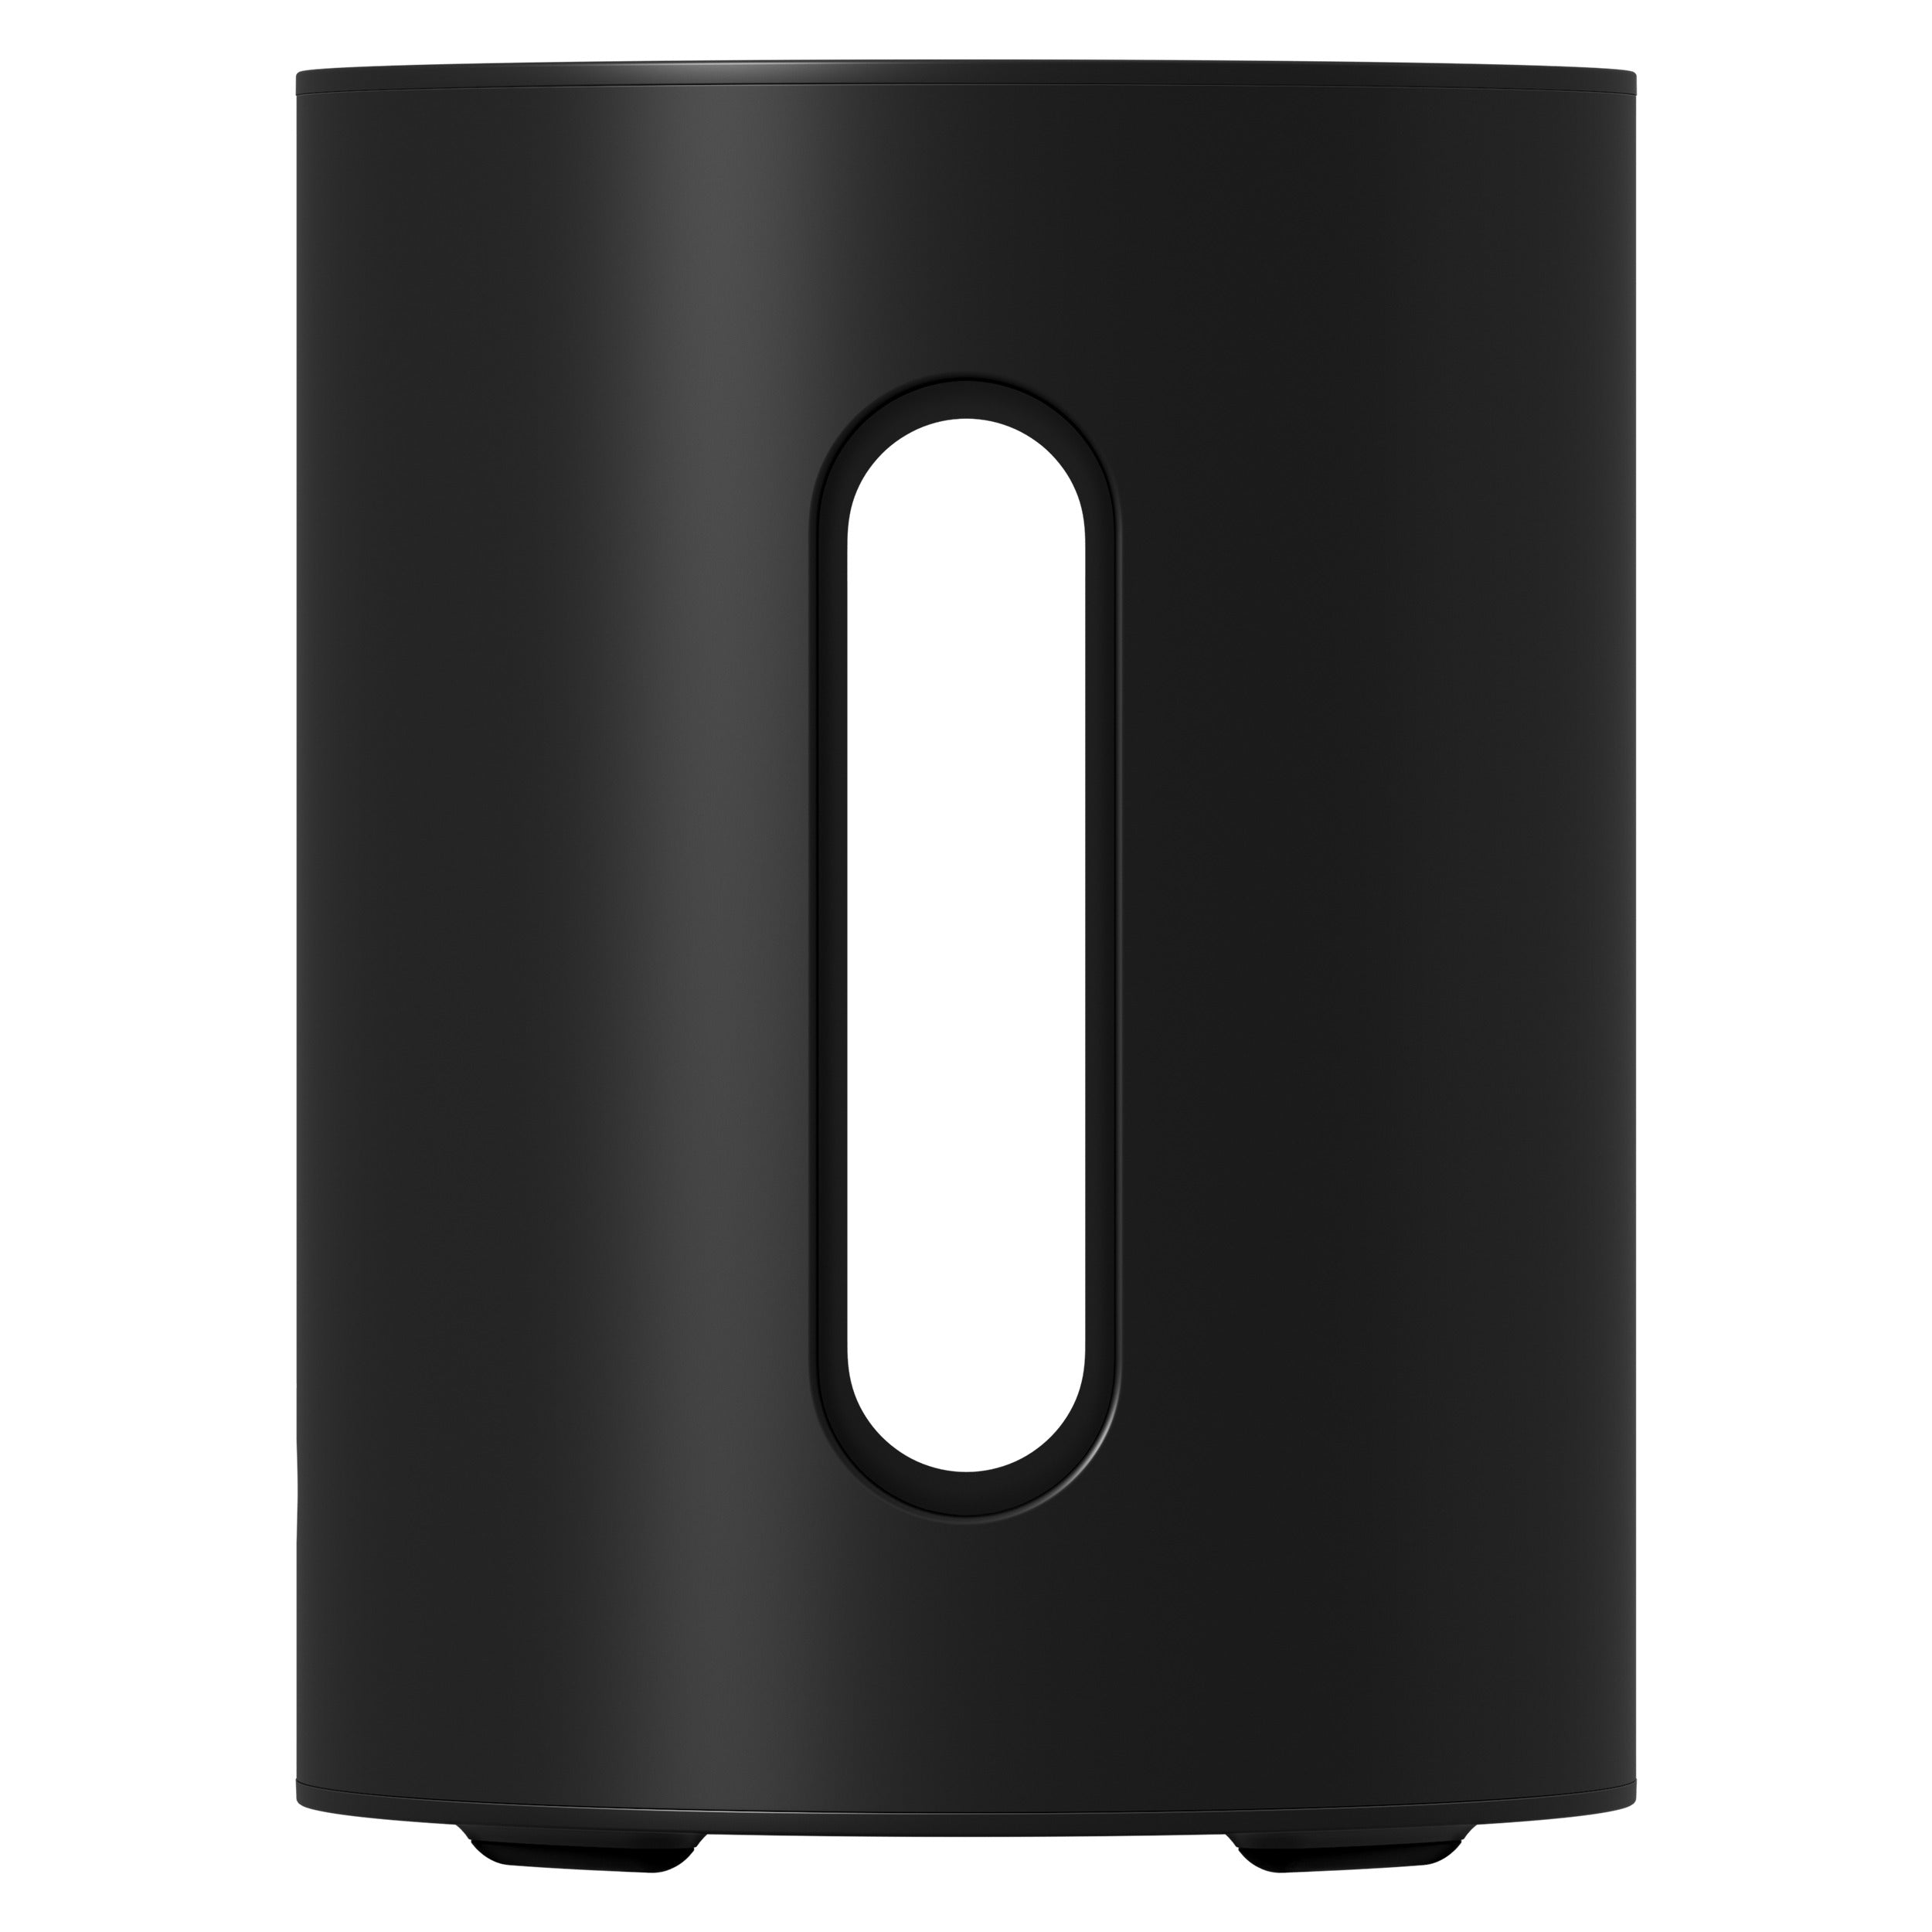 Sonos Sub Mini - The Compact with Big Bass